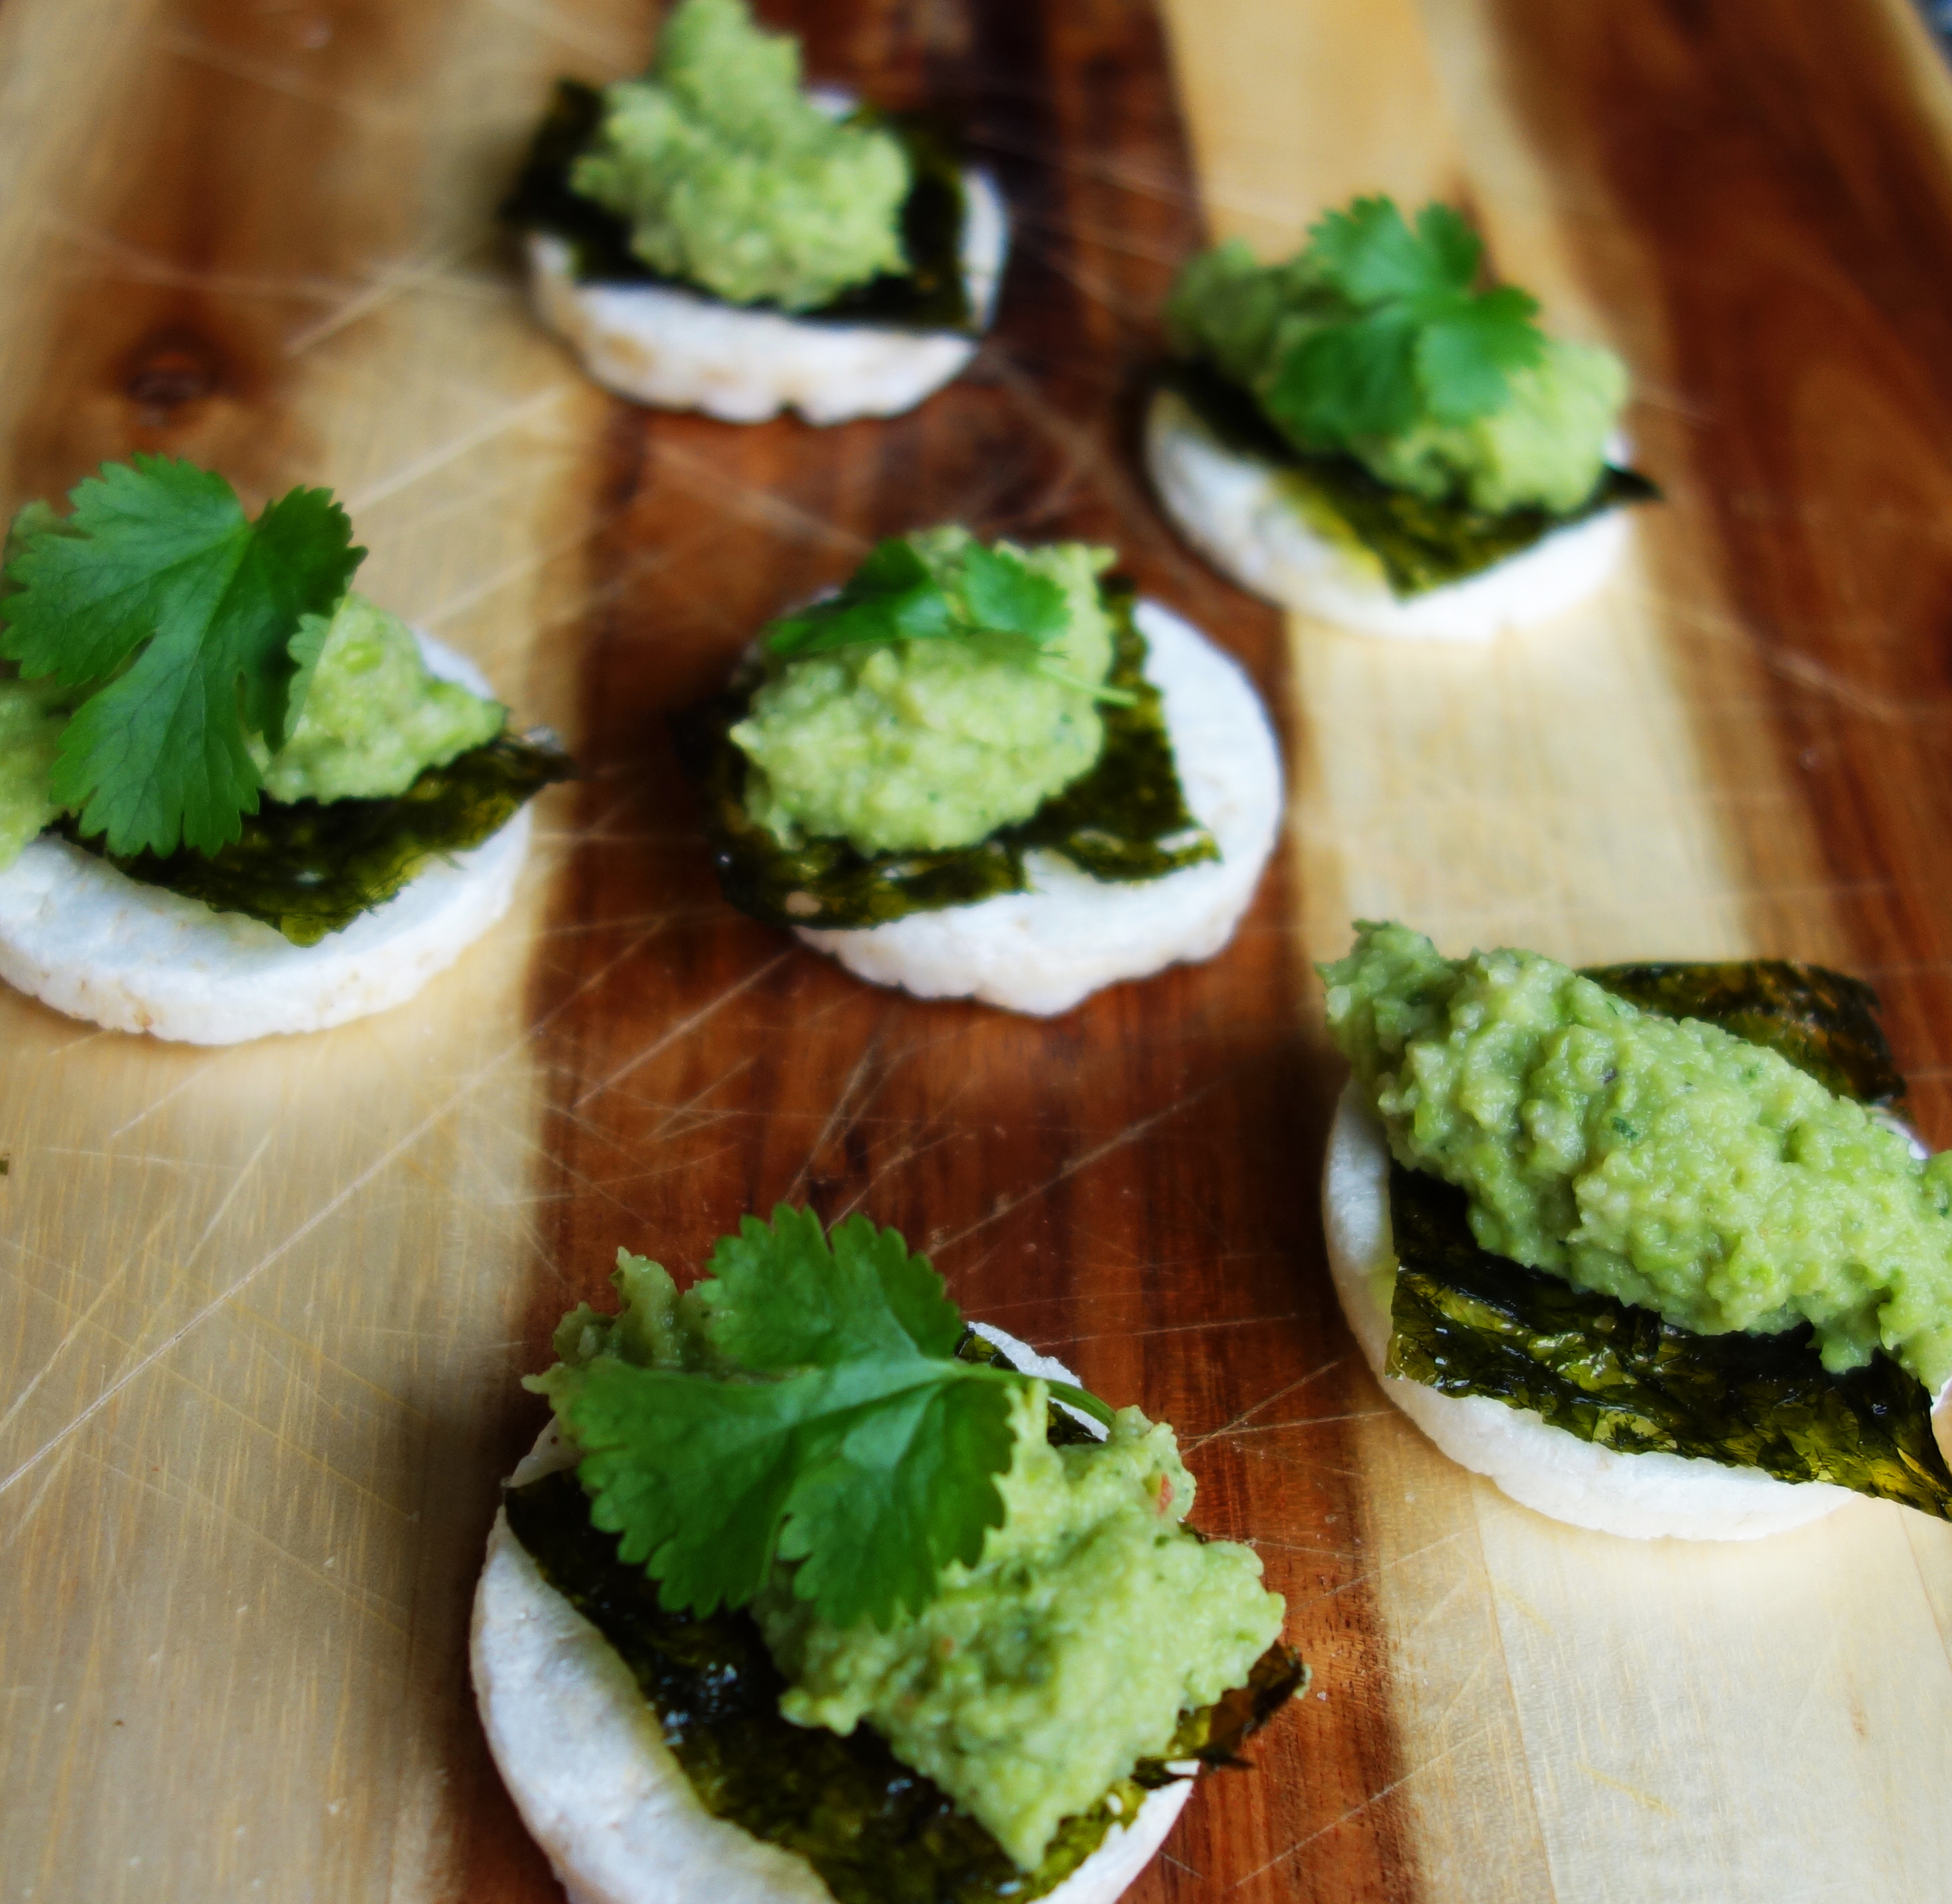 Spicy snack crackers with mashed avocado